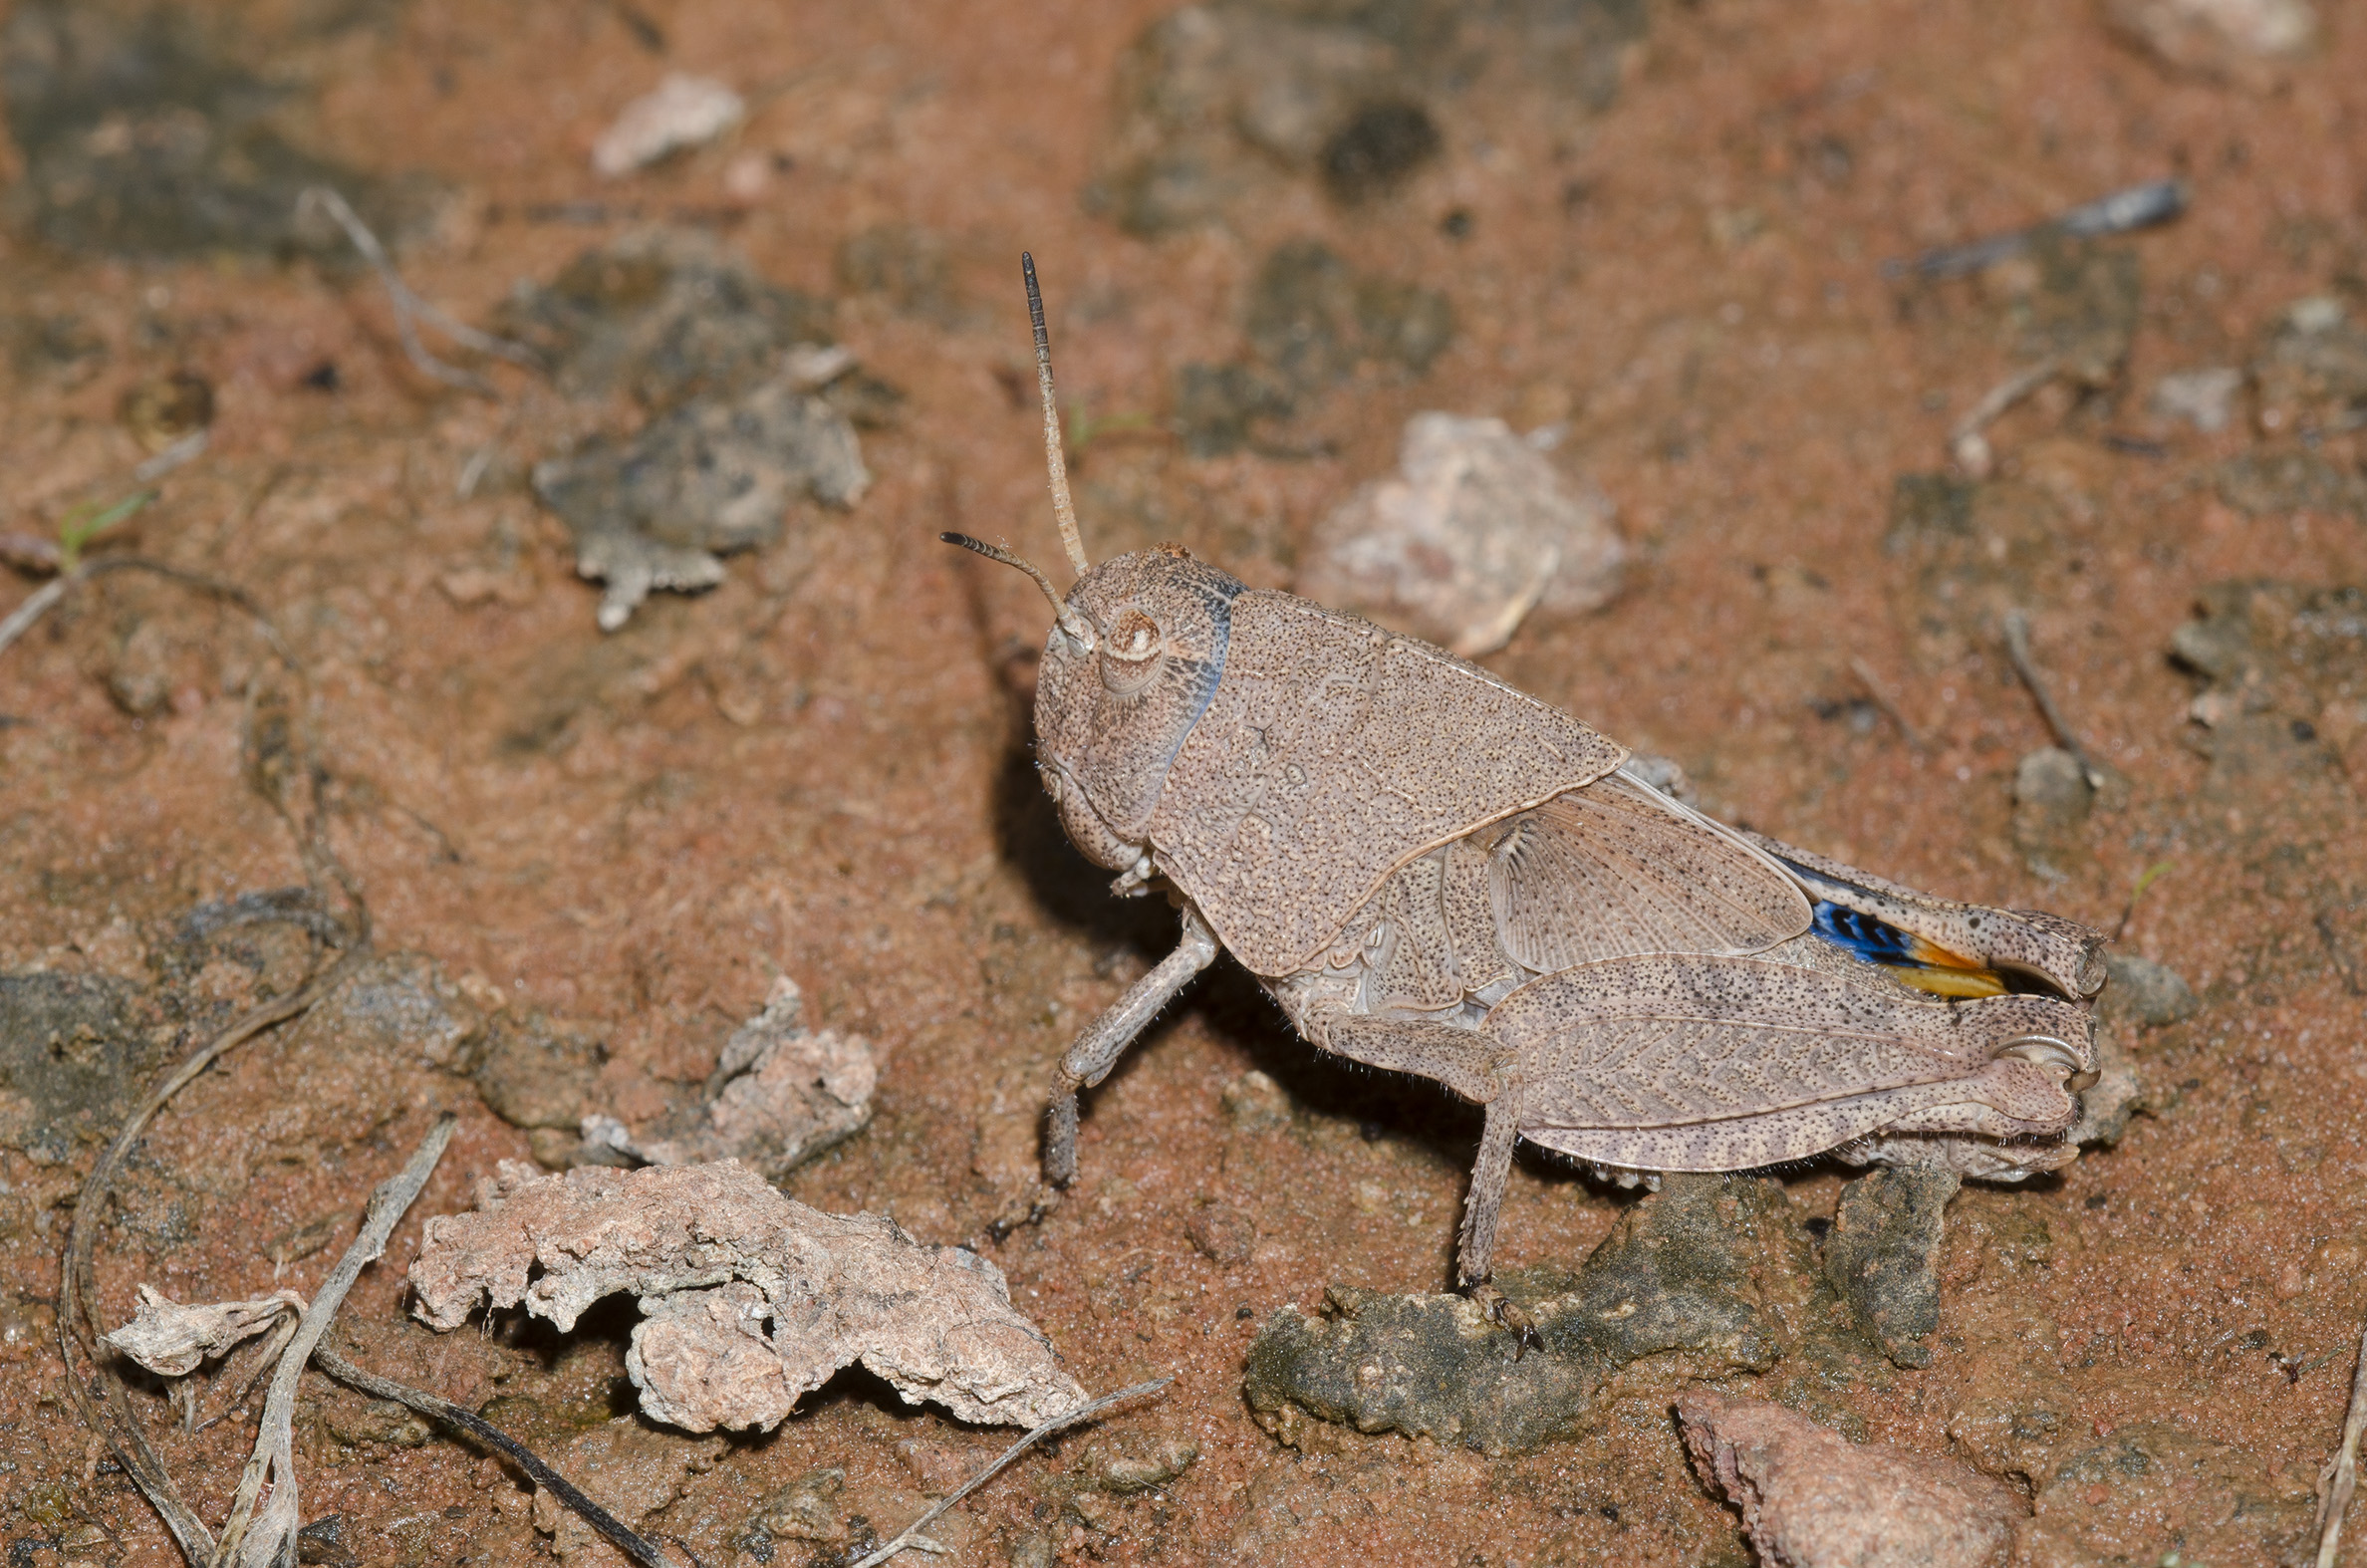 The reddish coloration of this grasshopper nymph makes it hard to see against the red soil. A patch of bright blue can be seen on it's hid leg.